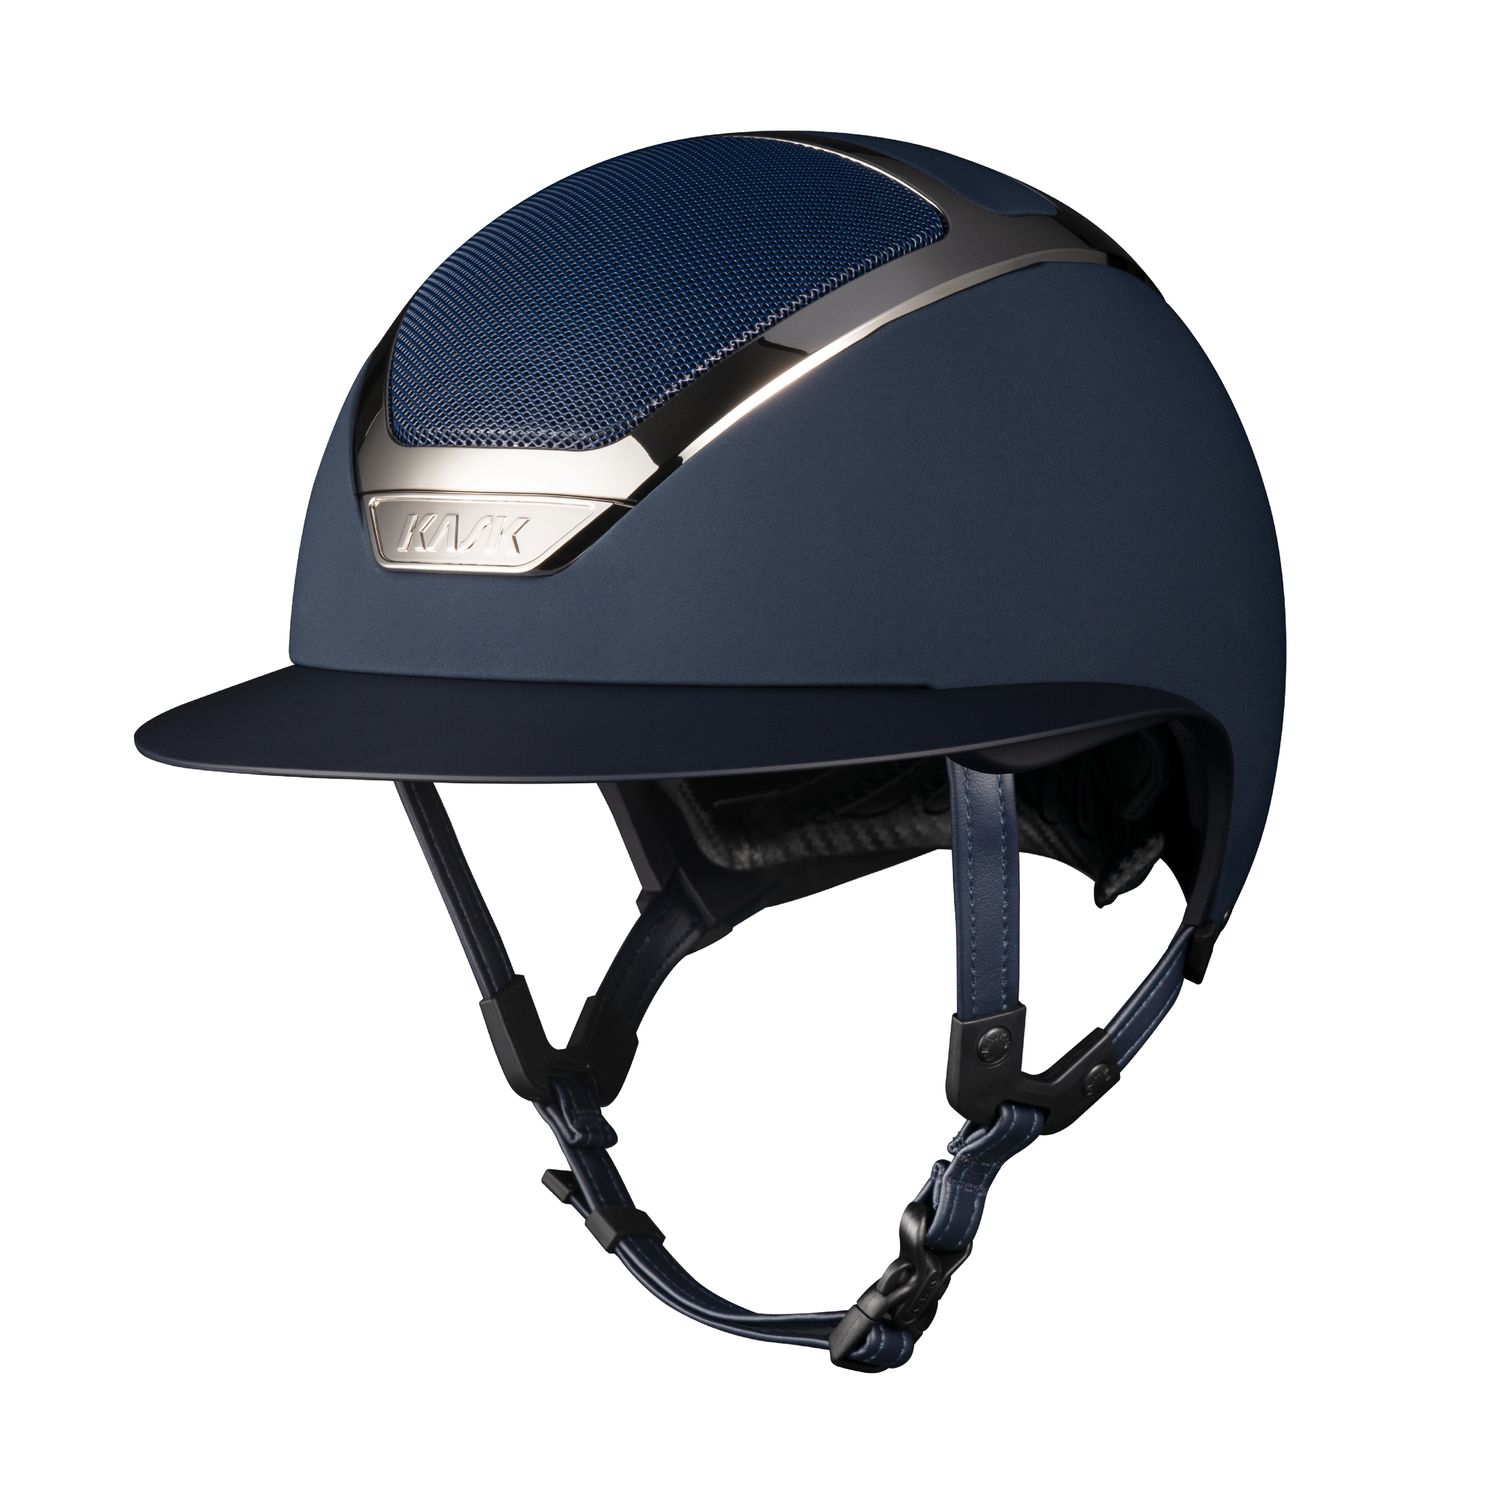 KASK Star Lady Chrome Reithelm inkl. Liner von KASK